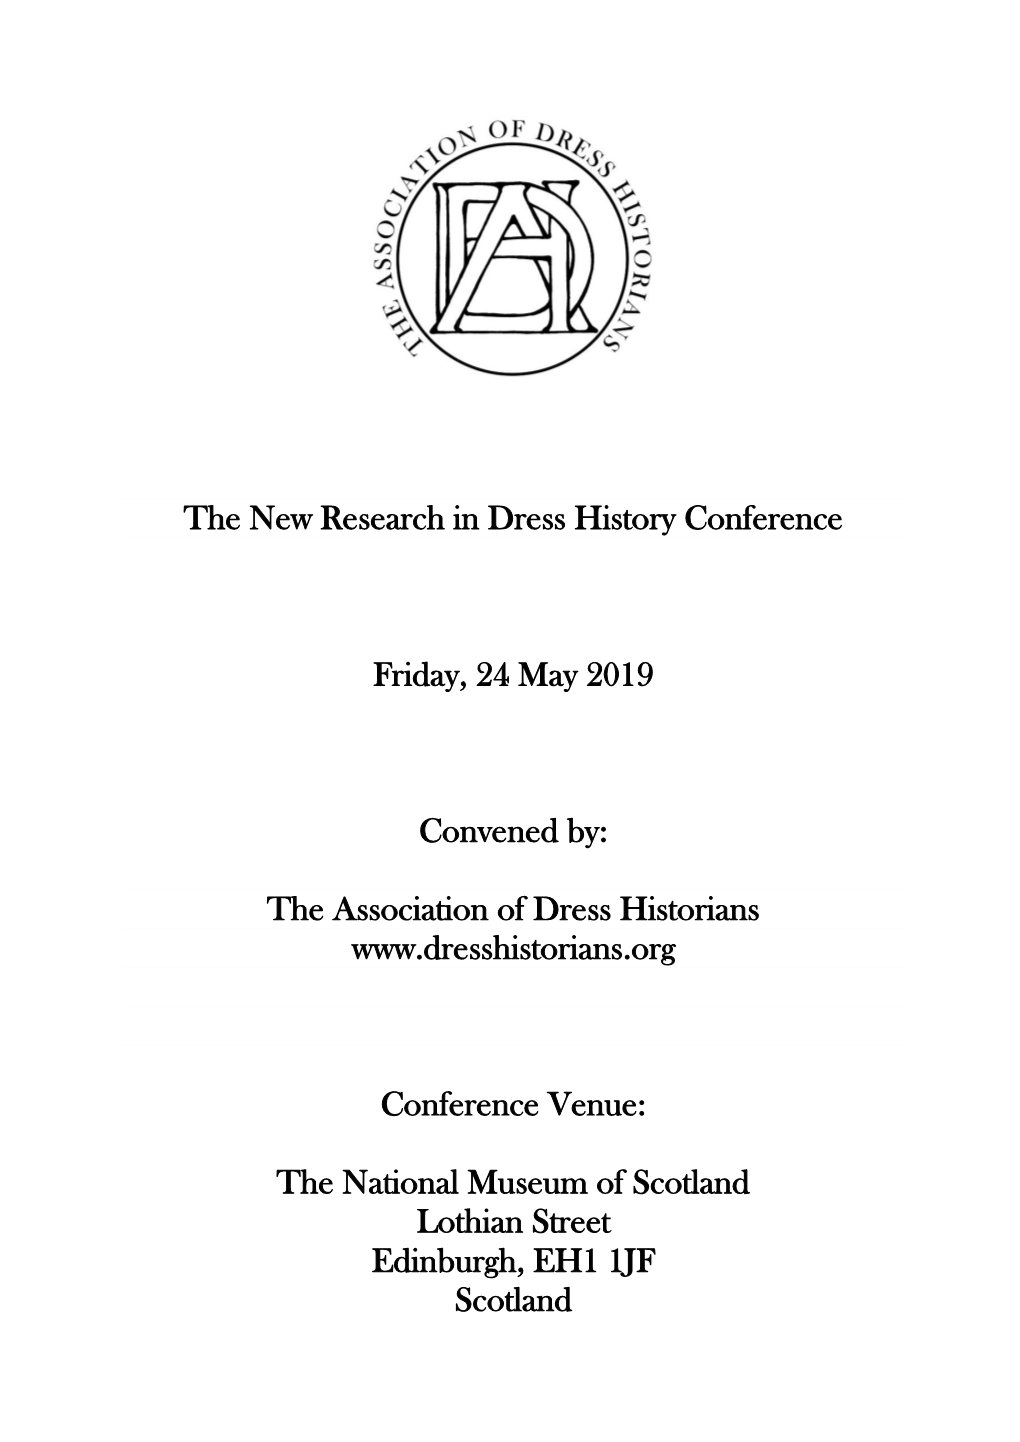 The New Research in Dress History Conference Friday, 24 May 2019